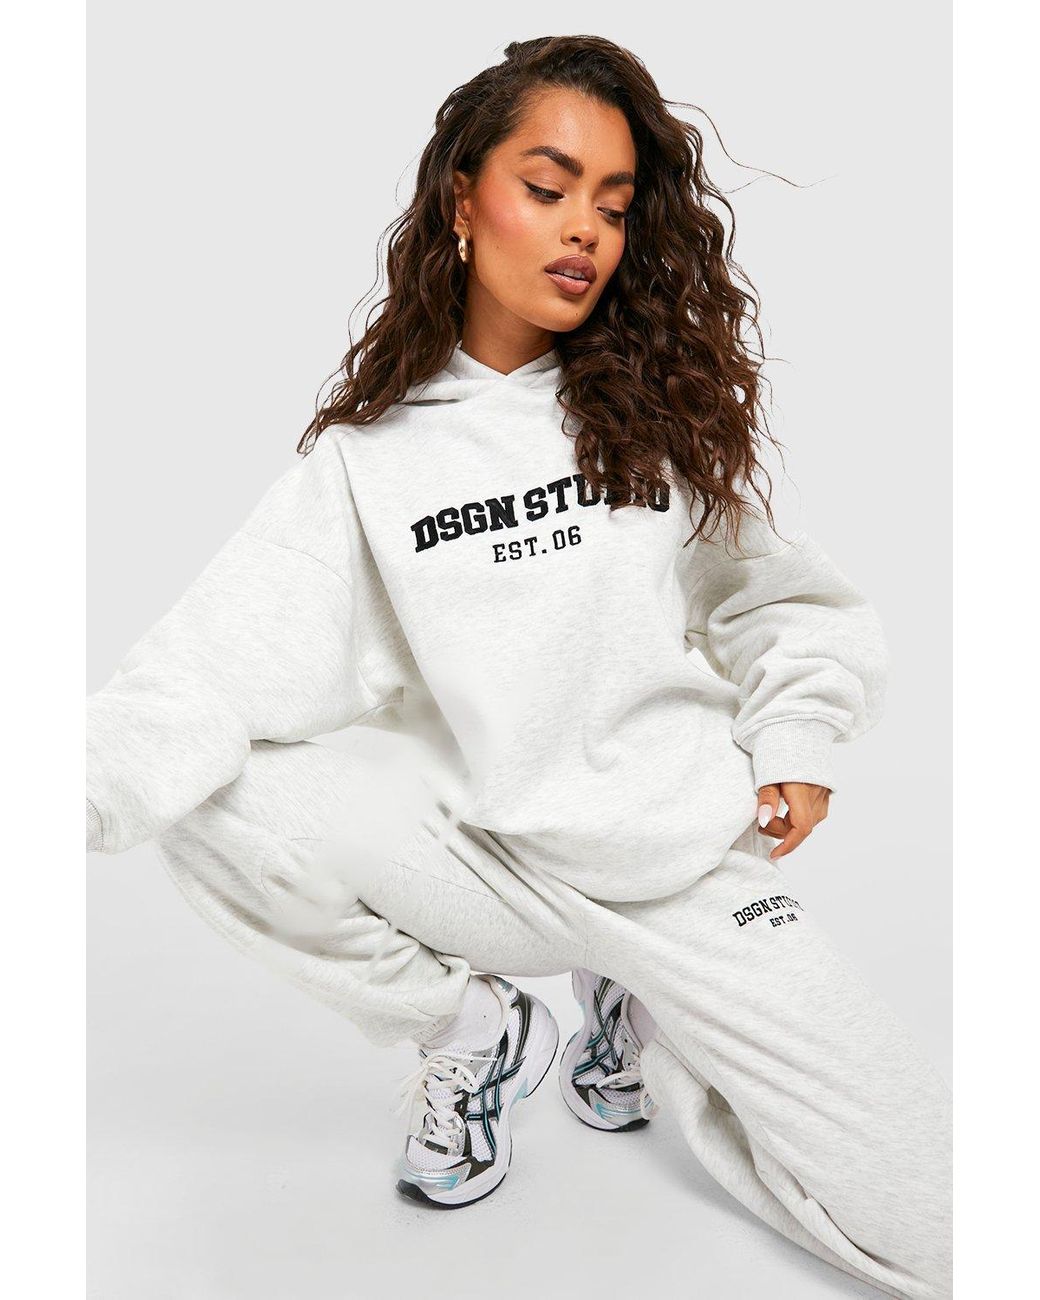 Boohoo Dsgn Studio Applique Hooded Tracksuit in White | Lyst Canada